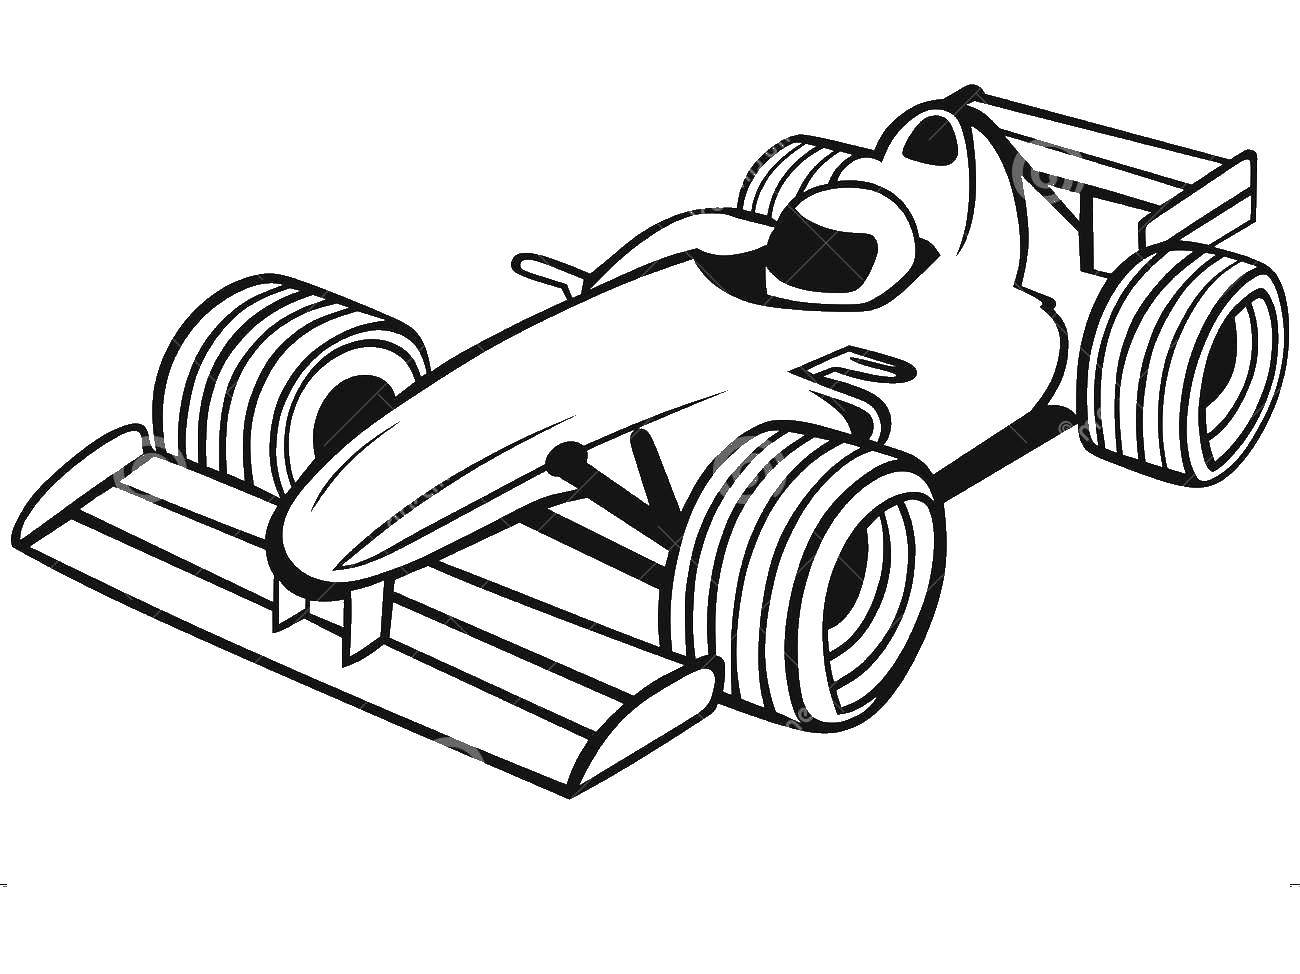 Coloring Race car. Category The contours of the machine. Tags:  machine.